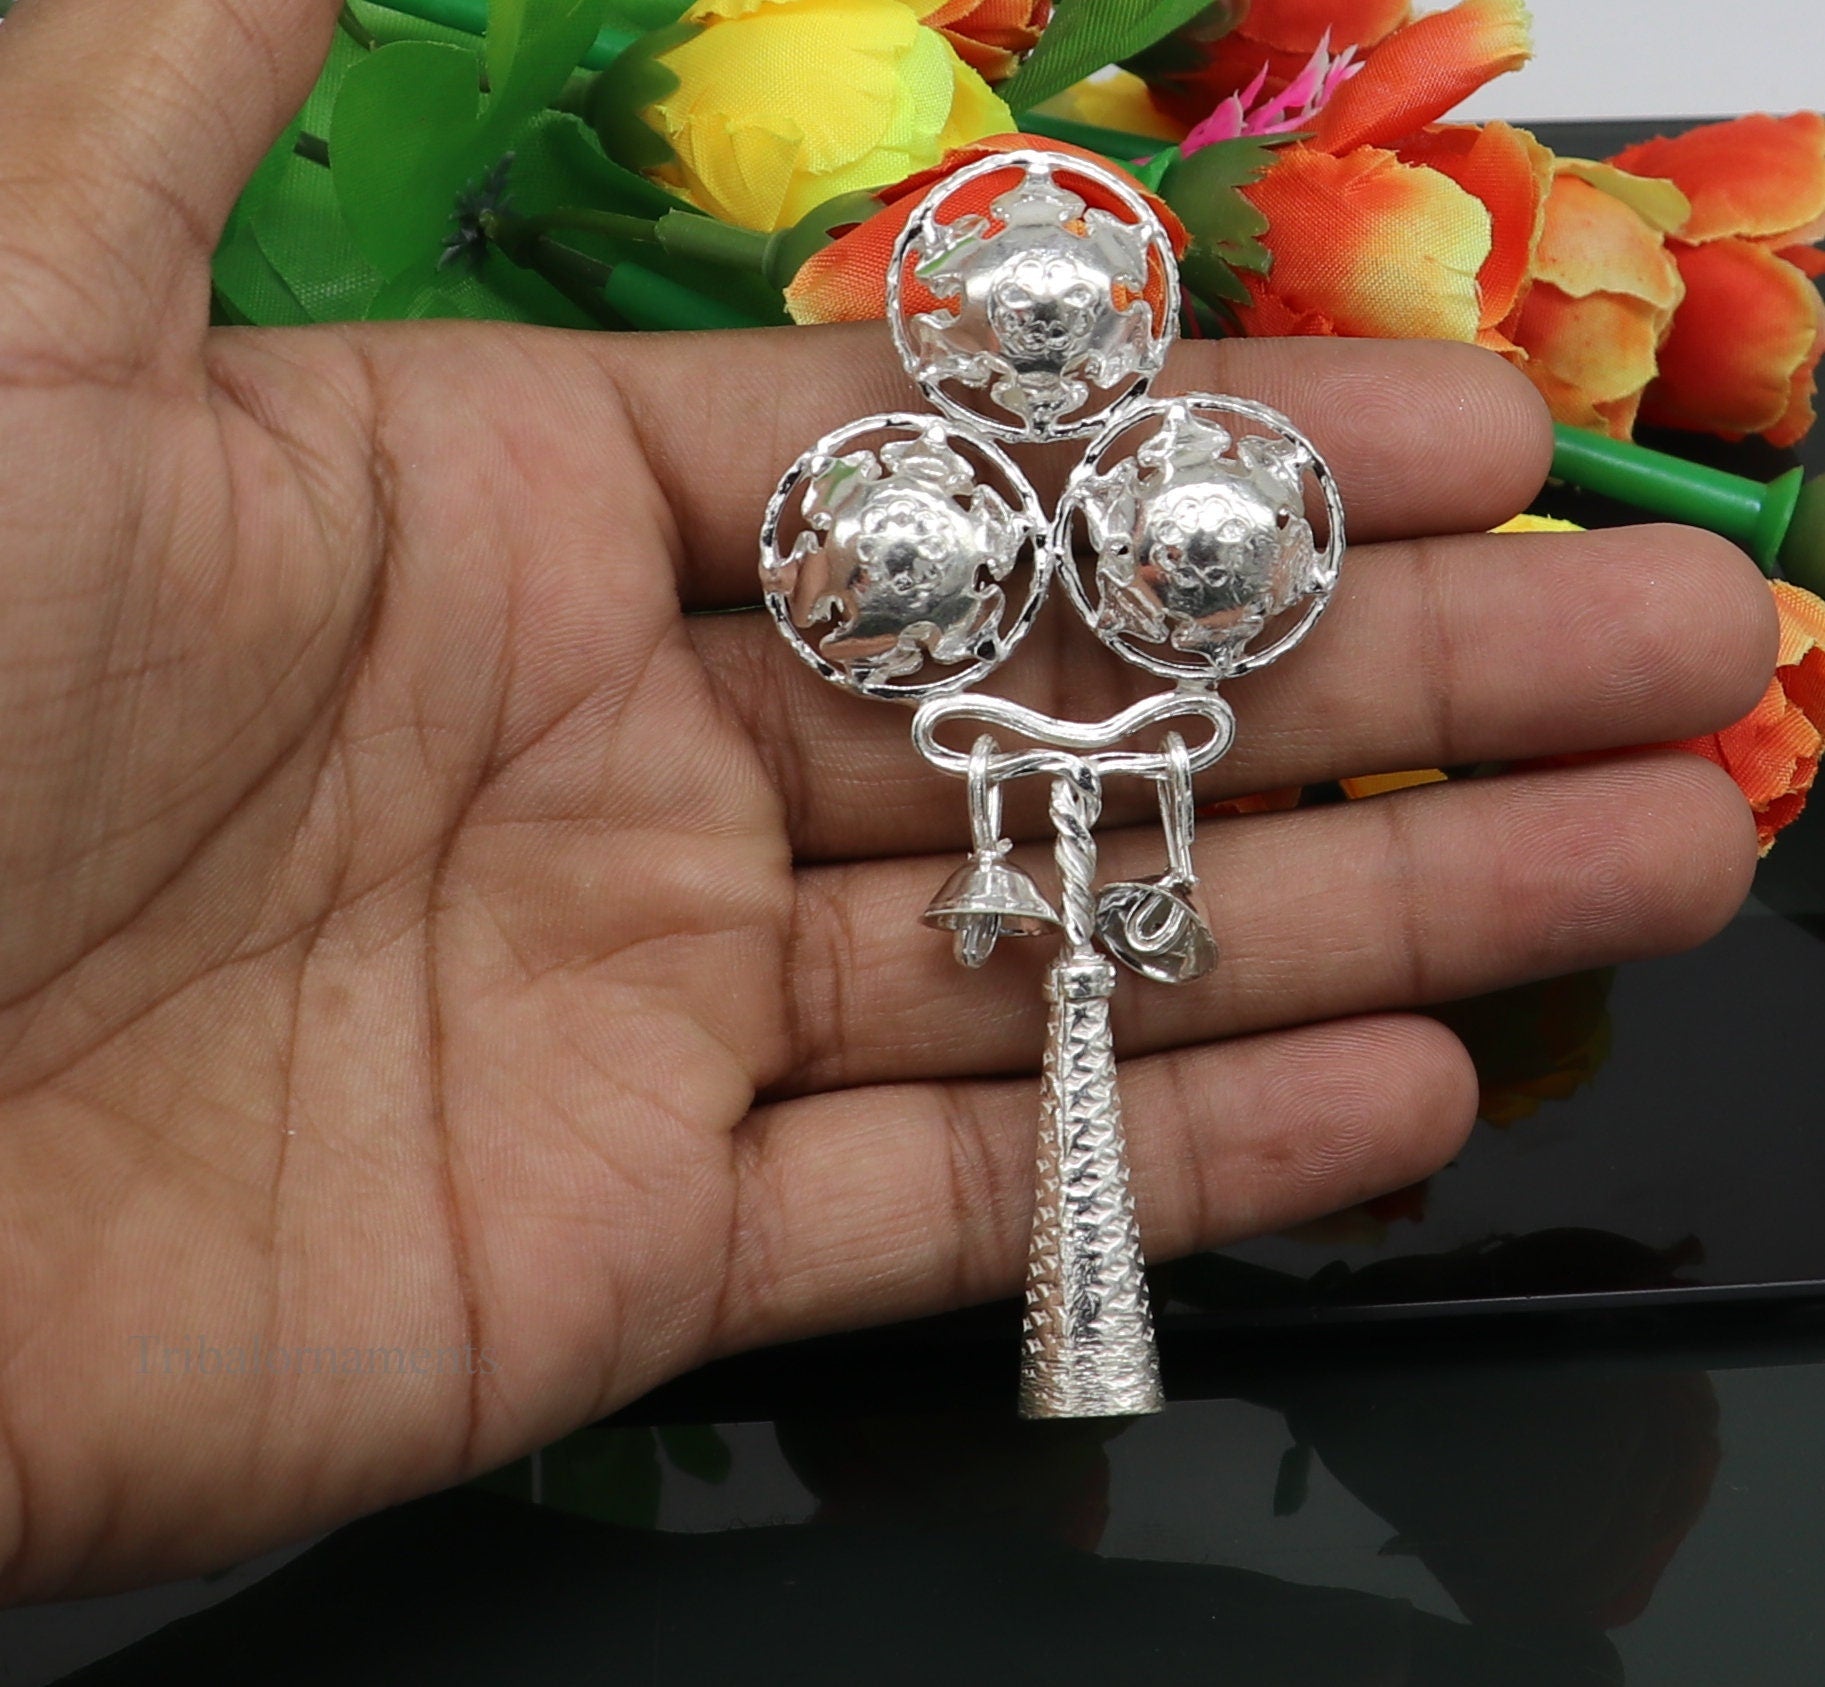 Solid sterling silver handmade design new born baby gifting bells toy, baby krishna gifting toy, silver whistle, silver temple article su410 - TRIBAL ORNAMENTS